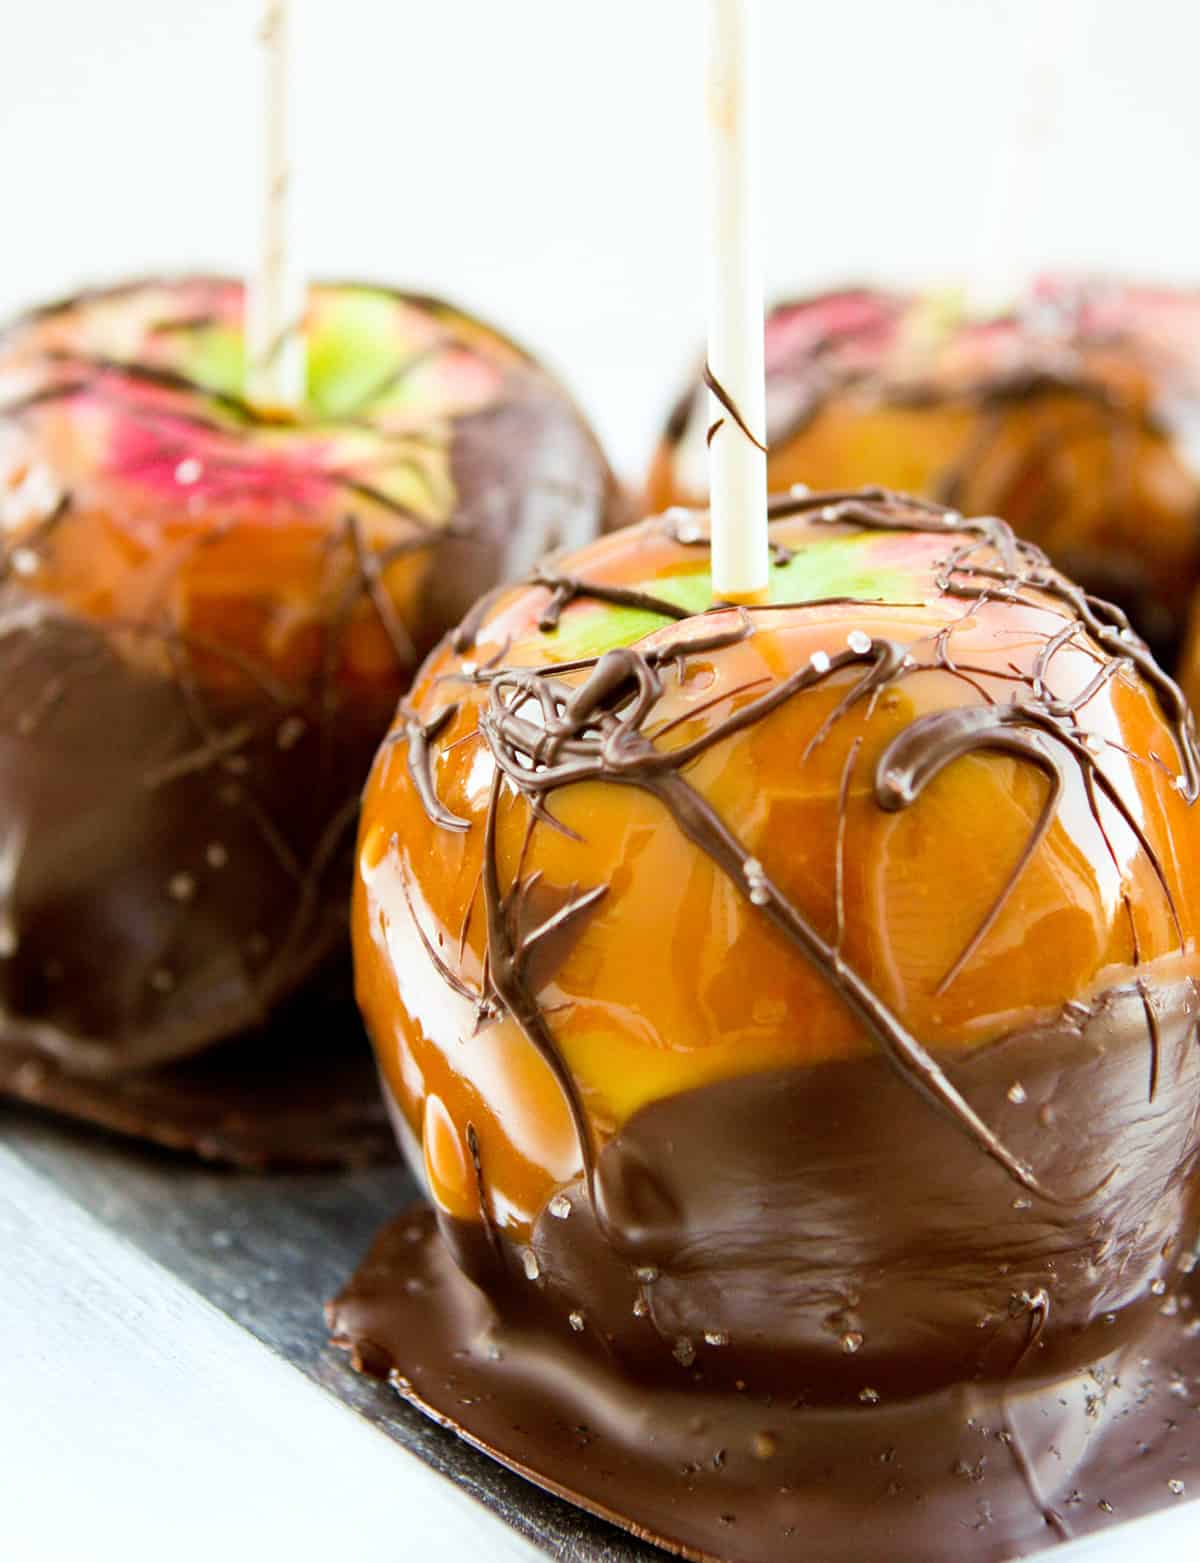  Close up of caramel apple dipped in chocolate with sea salt sprinkled around it.